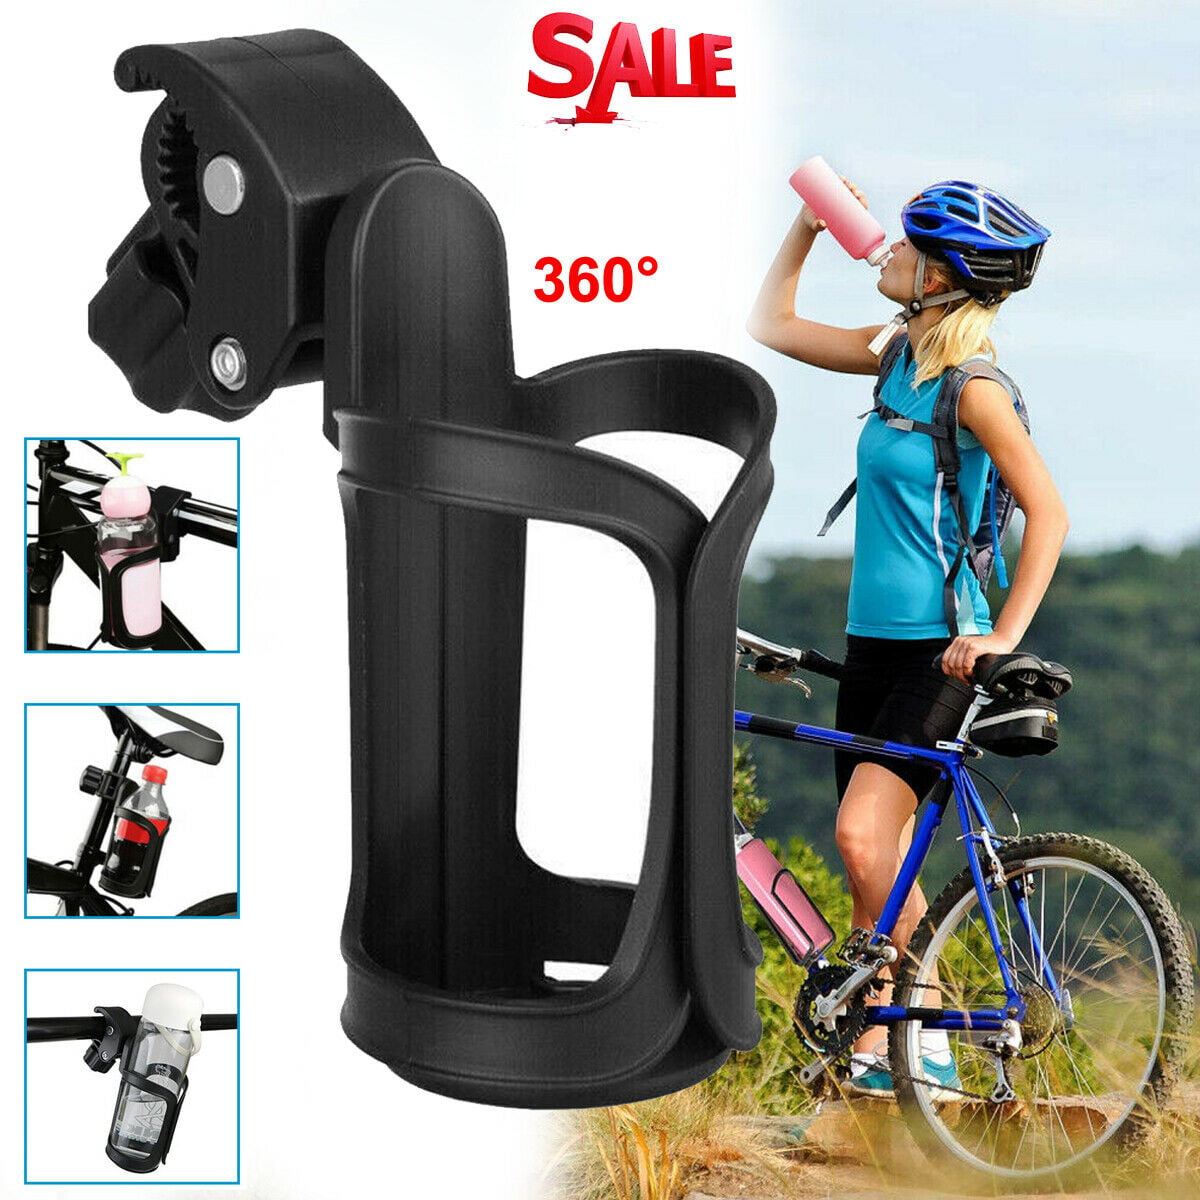 Adjustable Cycling Bicycle Handlebar Drink Water Bottle Cup Holder Mount Cage UK 